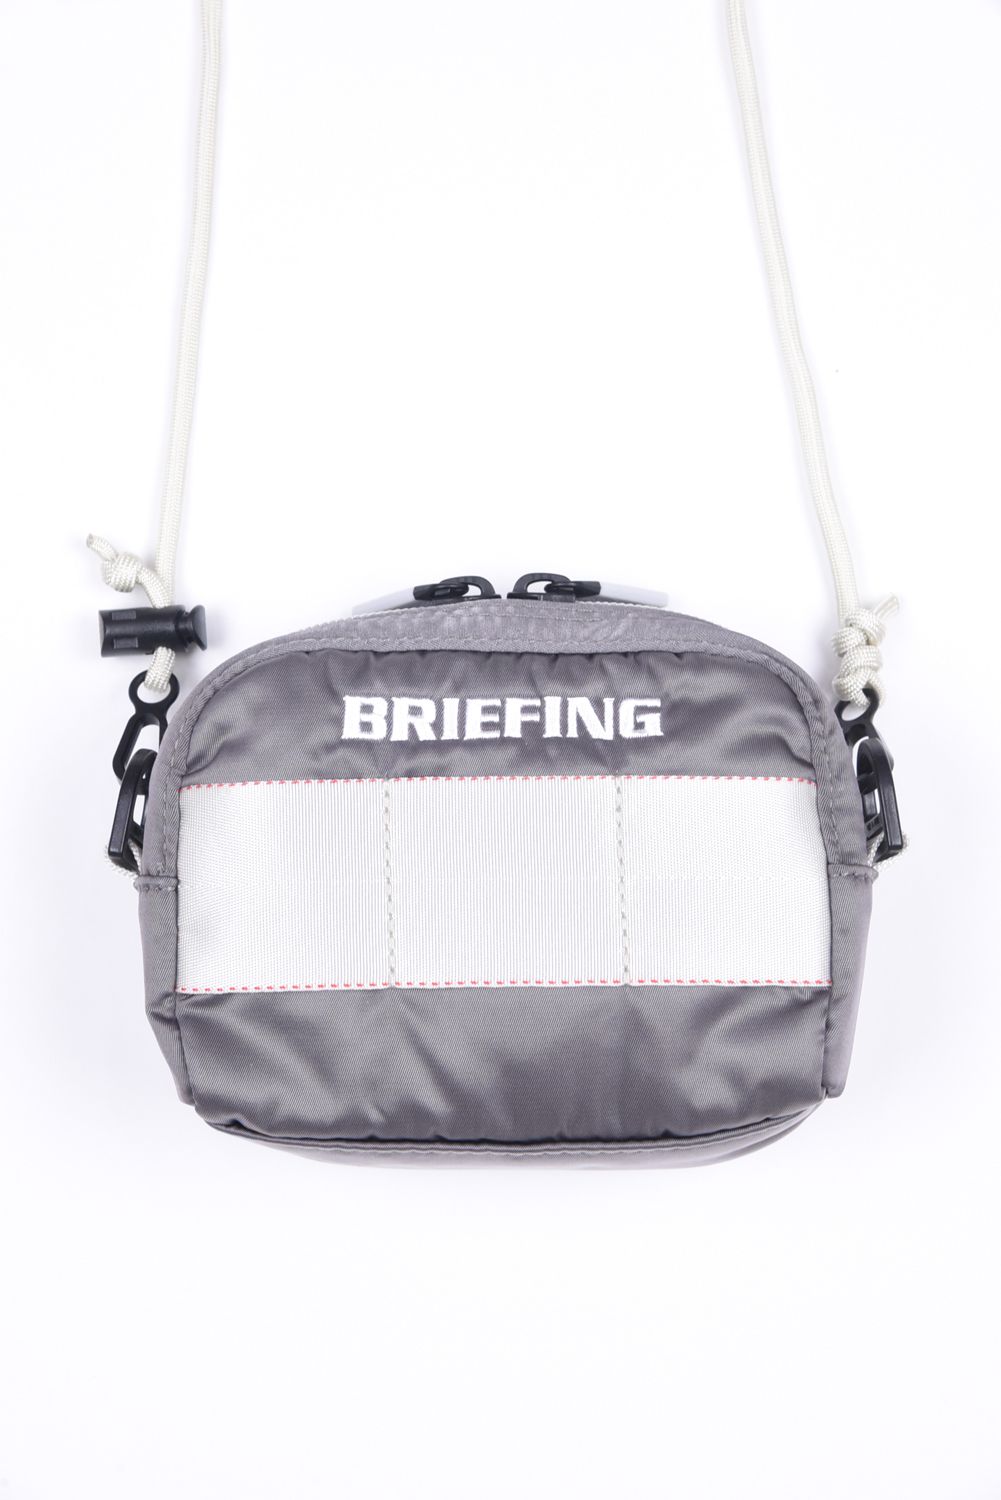 BRIEFING   エコツイル 3WAY POUCH GOLF ECO TWILL / 3WAYポーチ